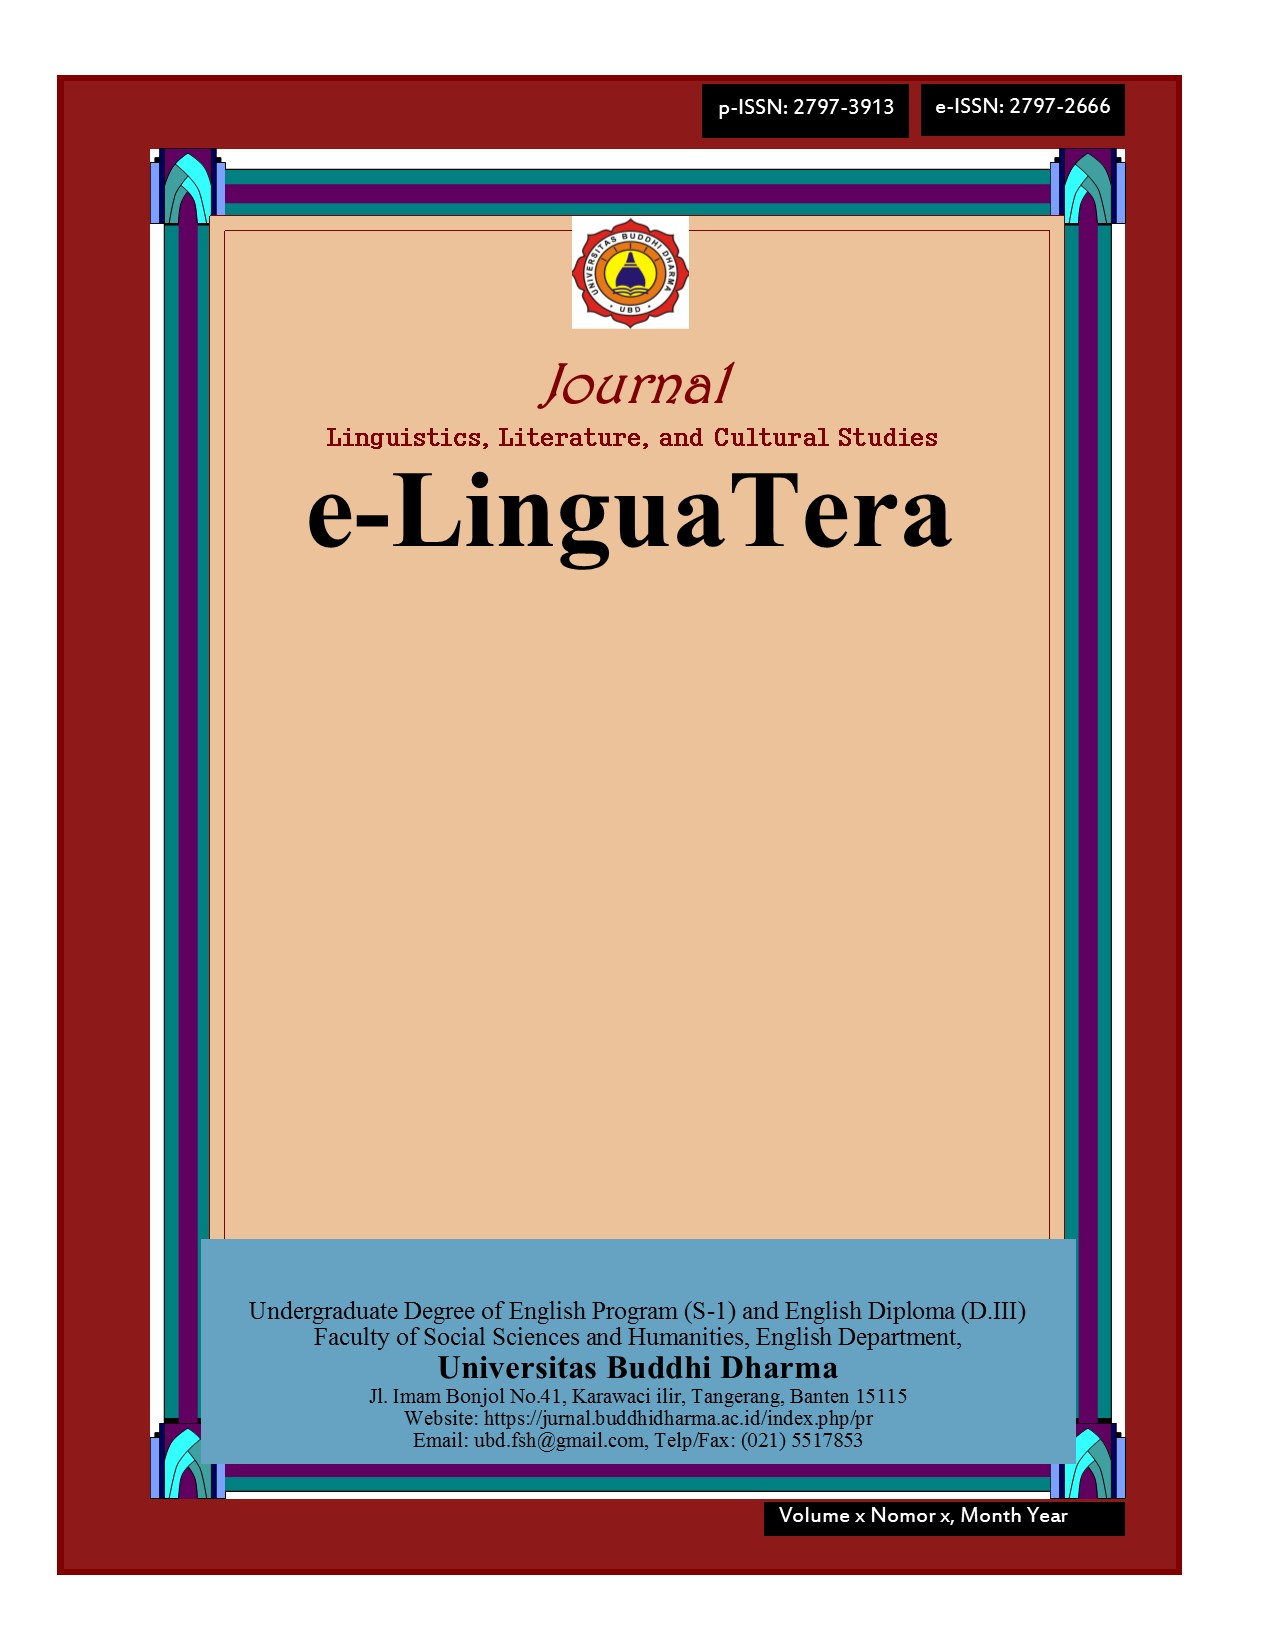 e-LinguaTera: Journal of Linguistics, Literature, Cultural Studies, and Oral Tradition